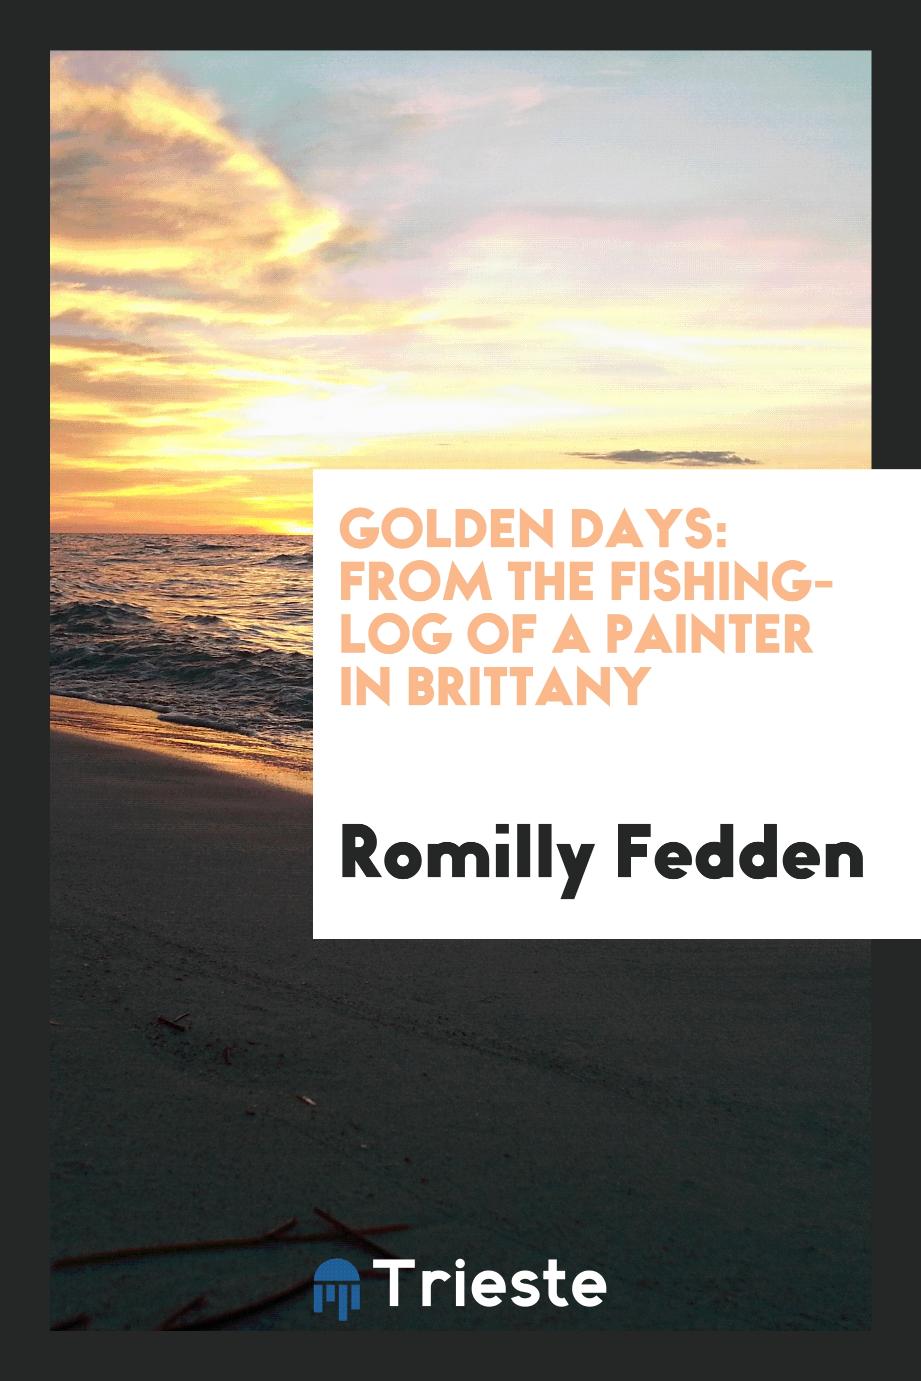 Golden days: from the fishing-log of a painter in Brittany